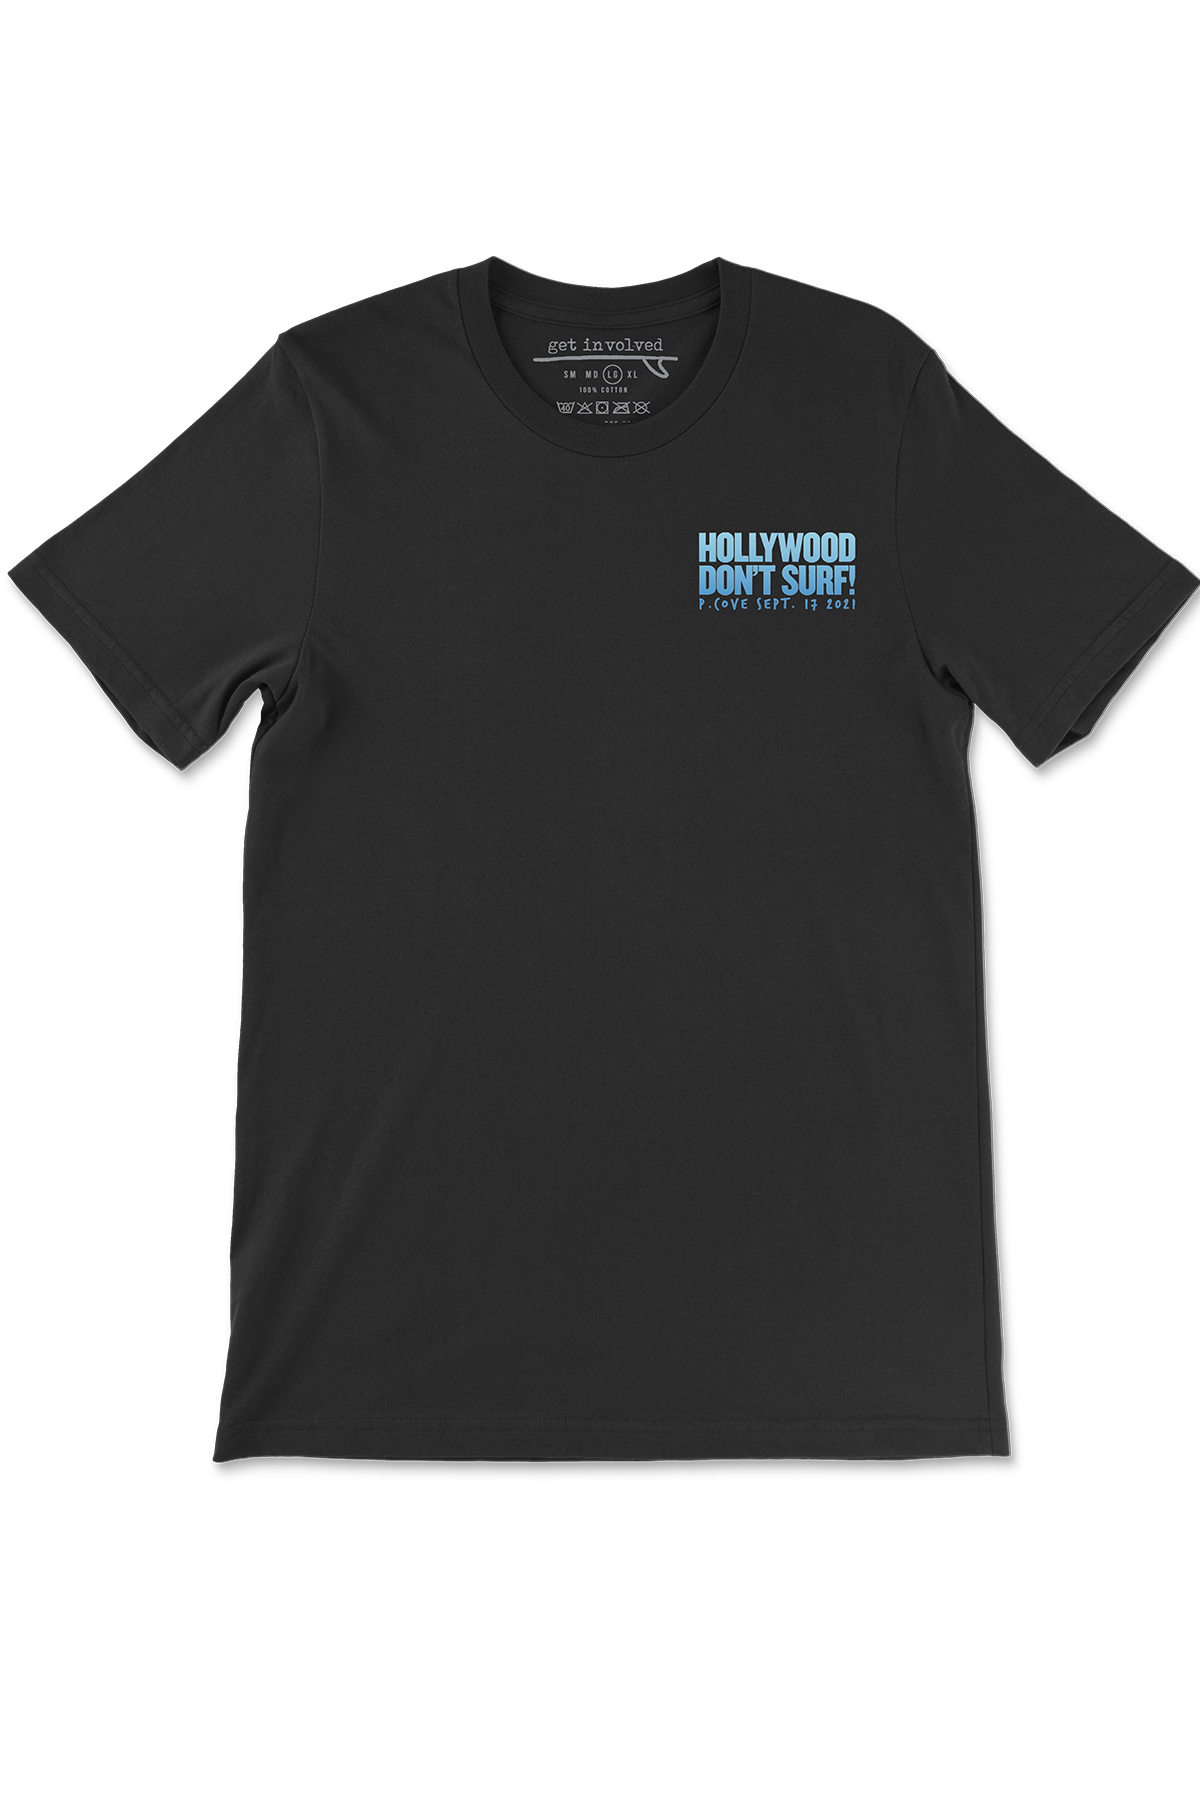 Hollywood Dont Surf! - Limited Edition Event Tee